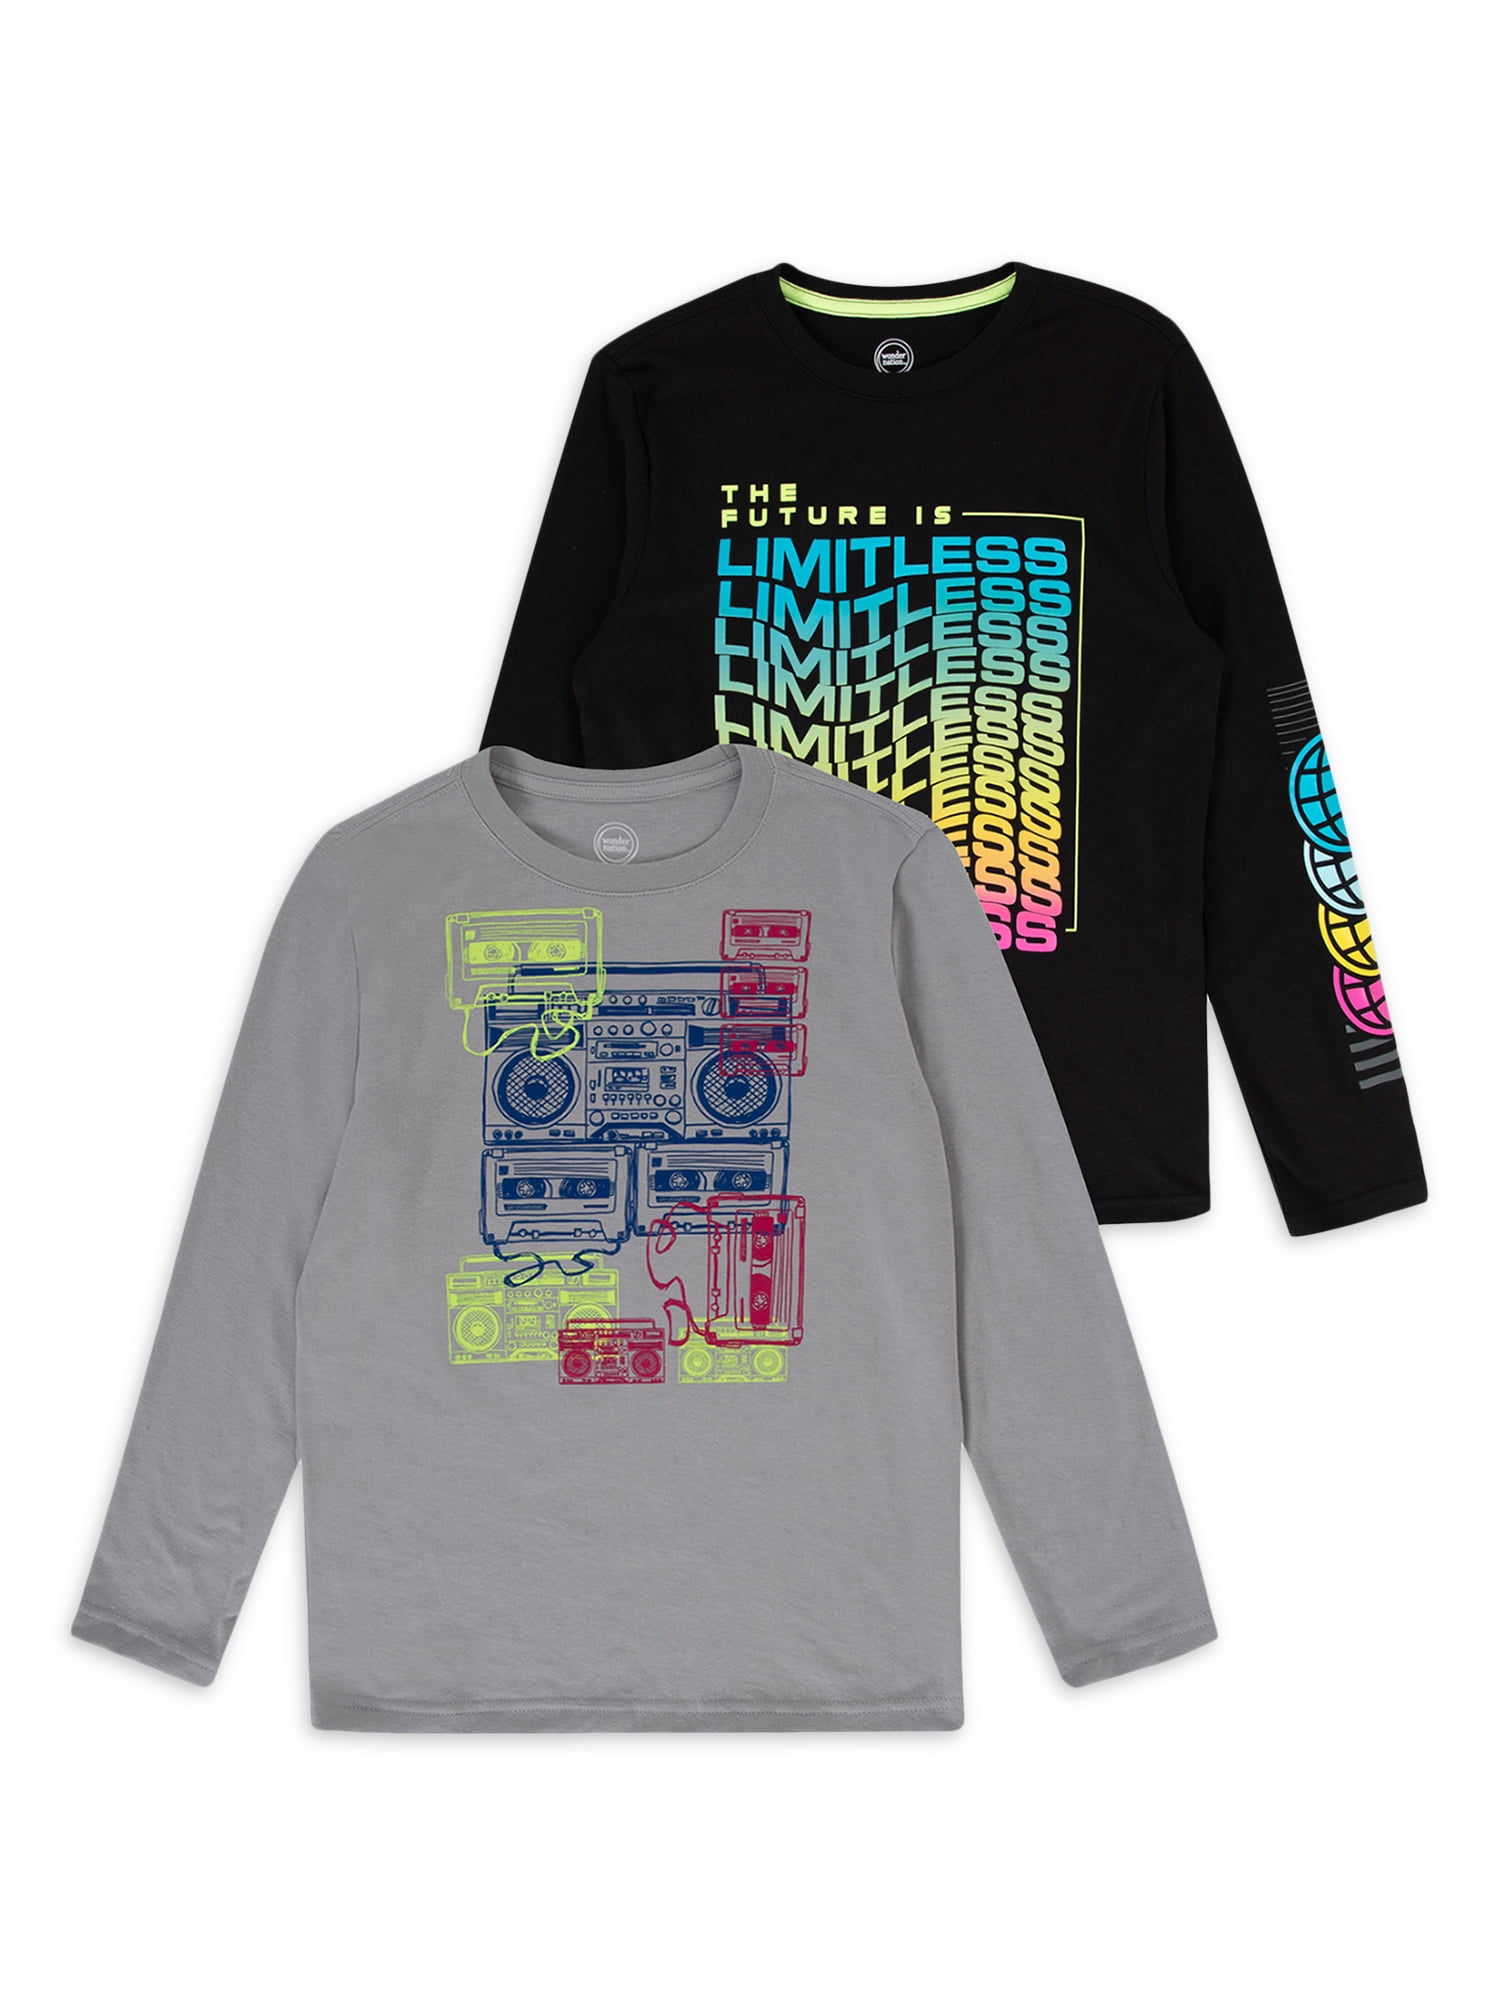 Boys Long Sleeved T Shirt New Kids Cotton Rich Graphic Print Top Ages 2-6 Years 